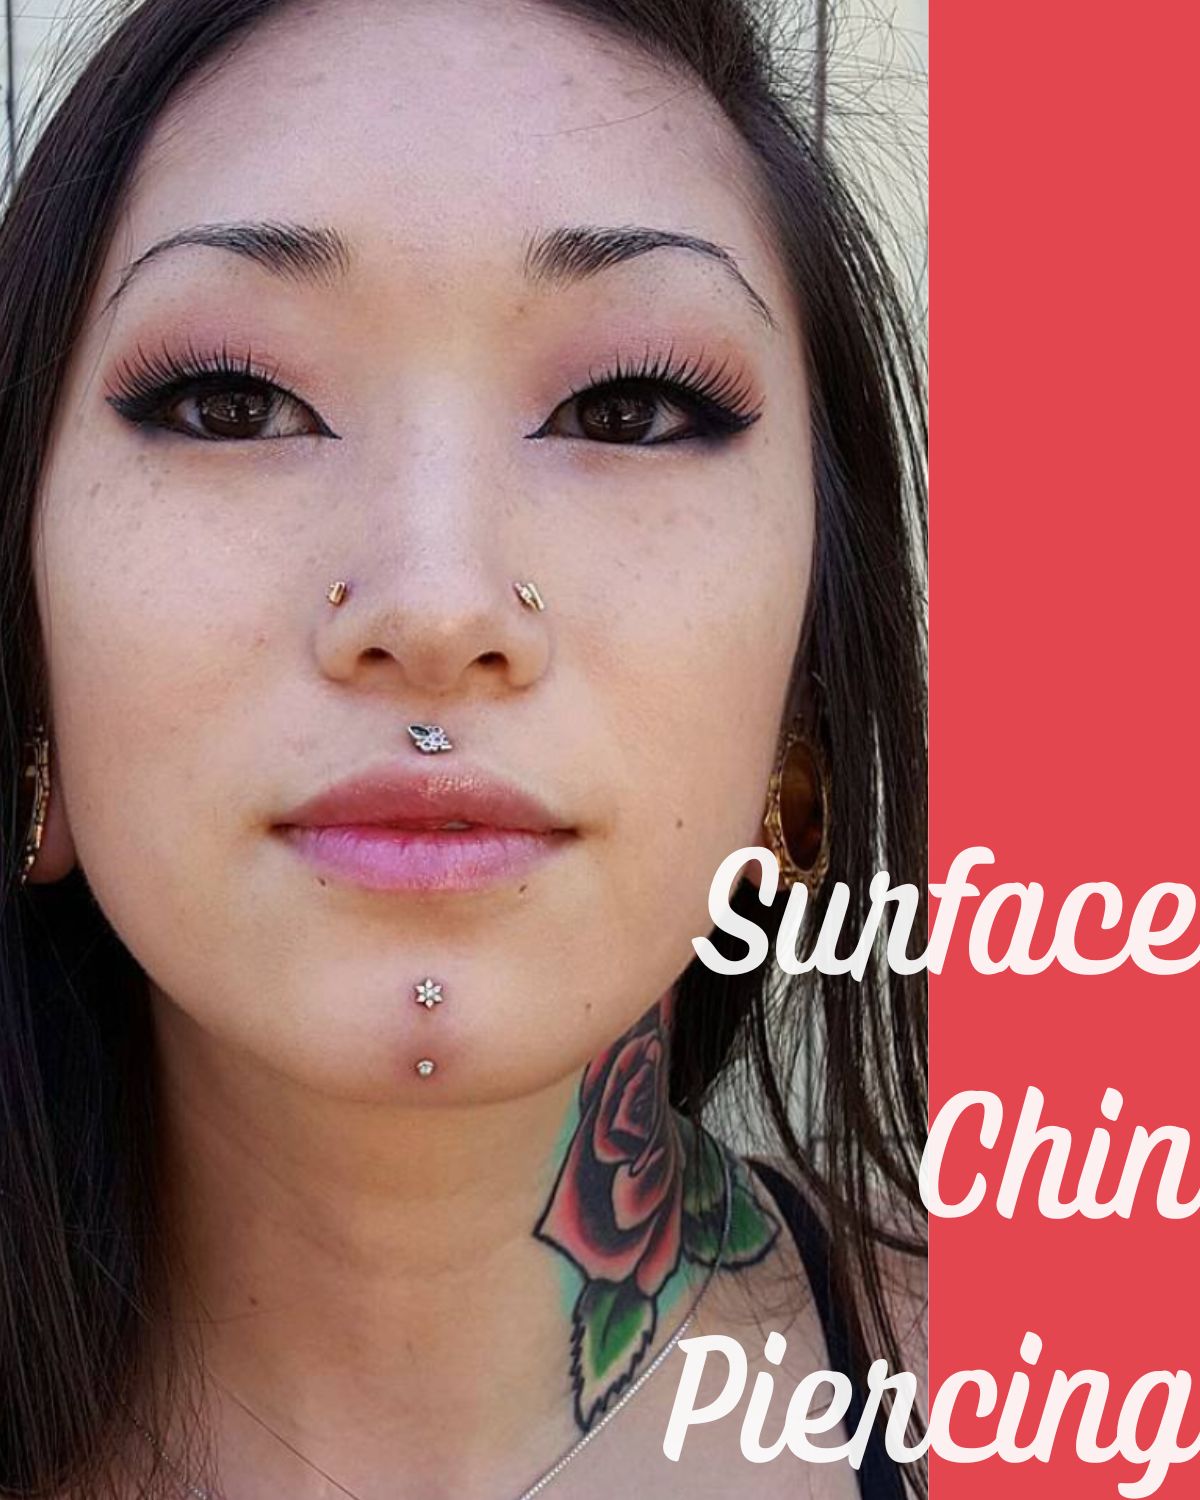 A girl with a surface chin piercing